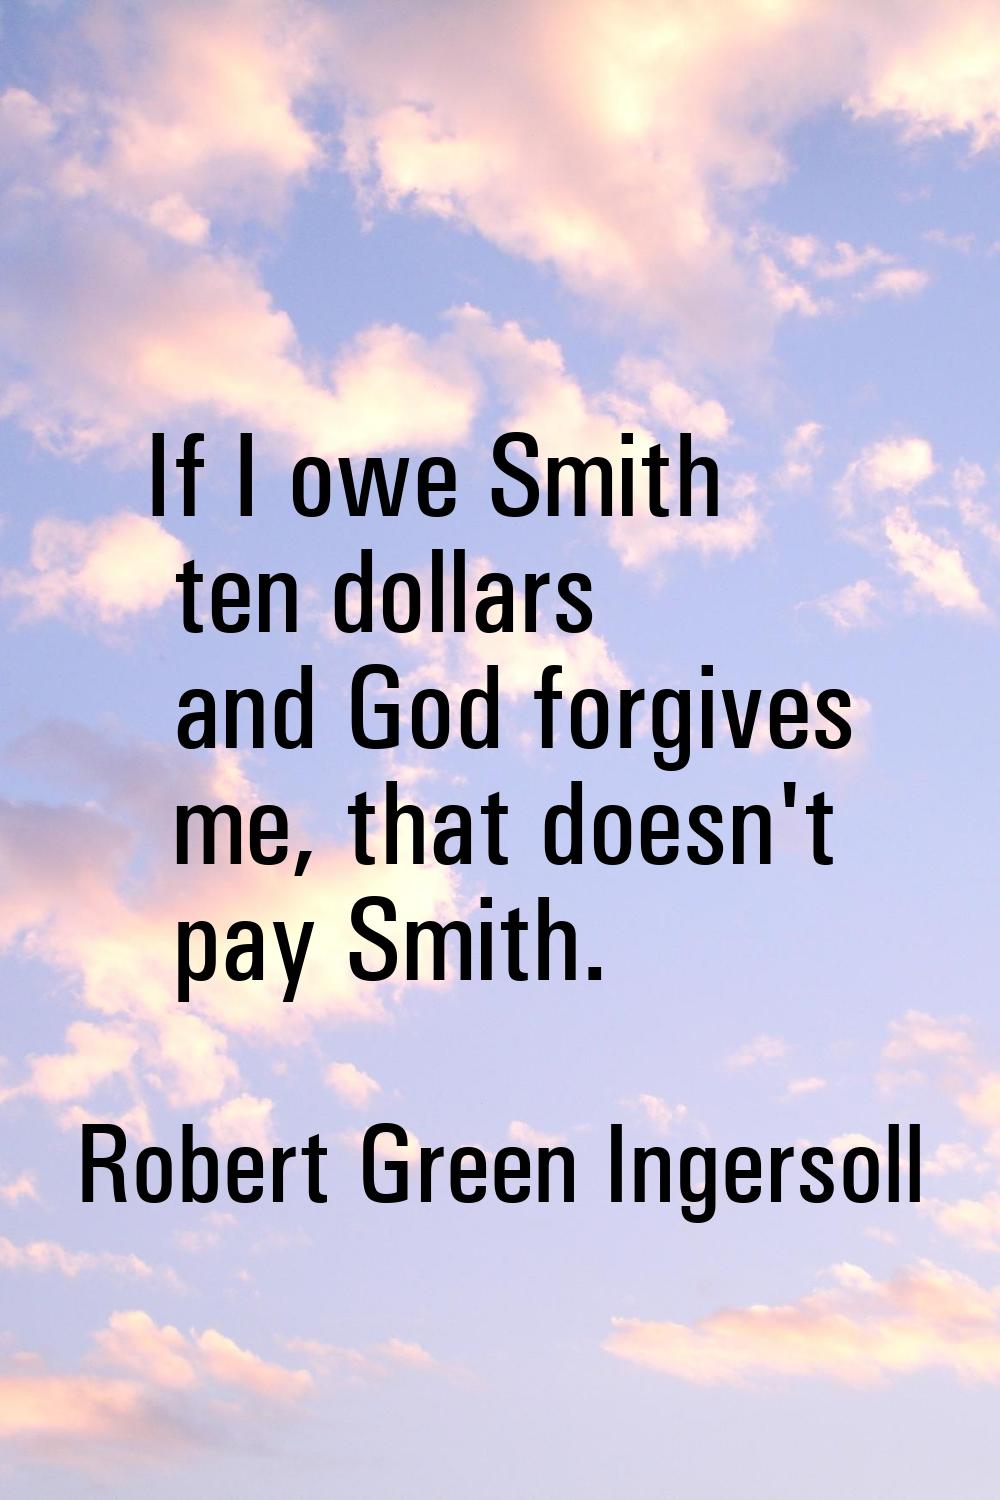 If I owe Smith ten dollars and God forgives me, that doesn't pay Smith.